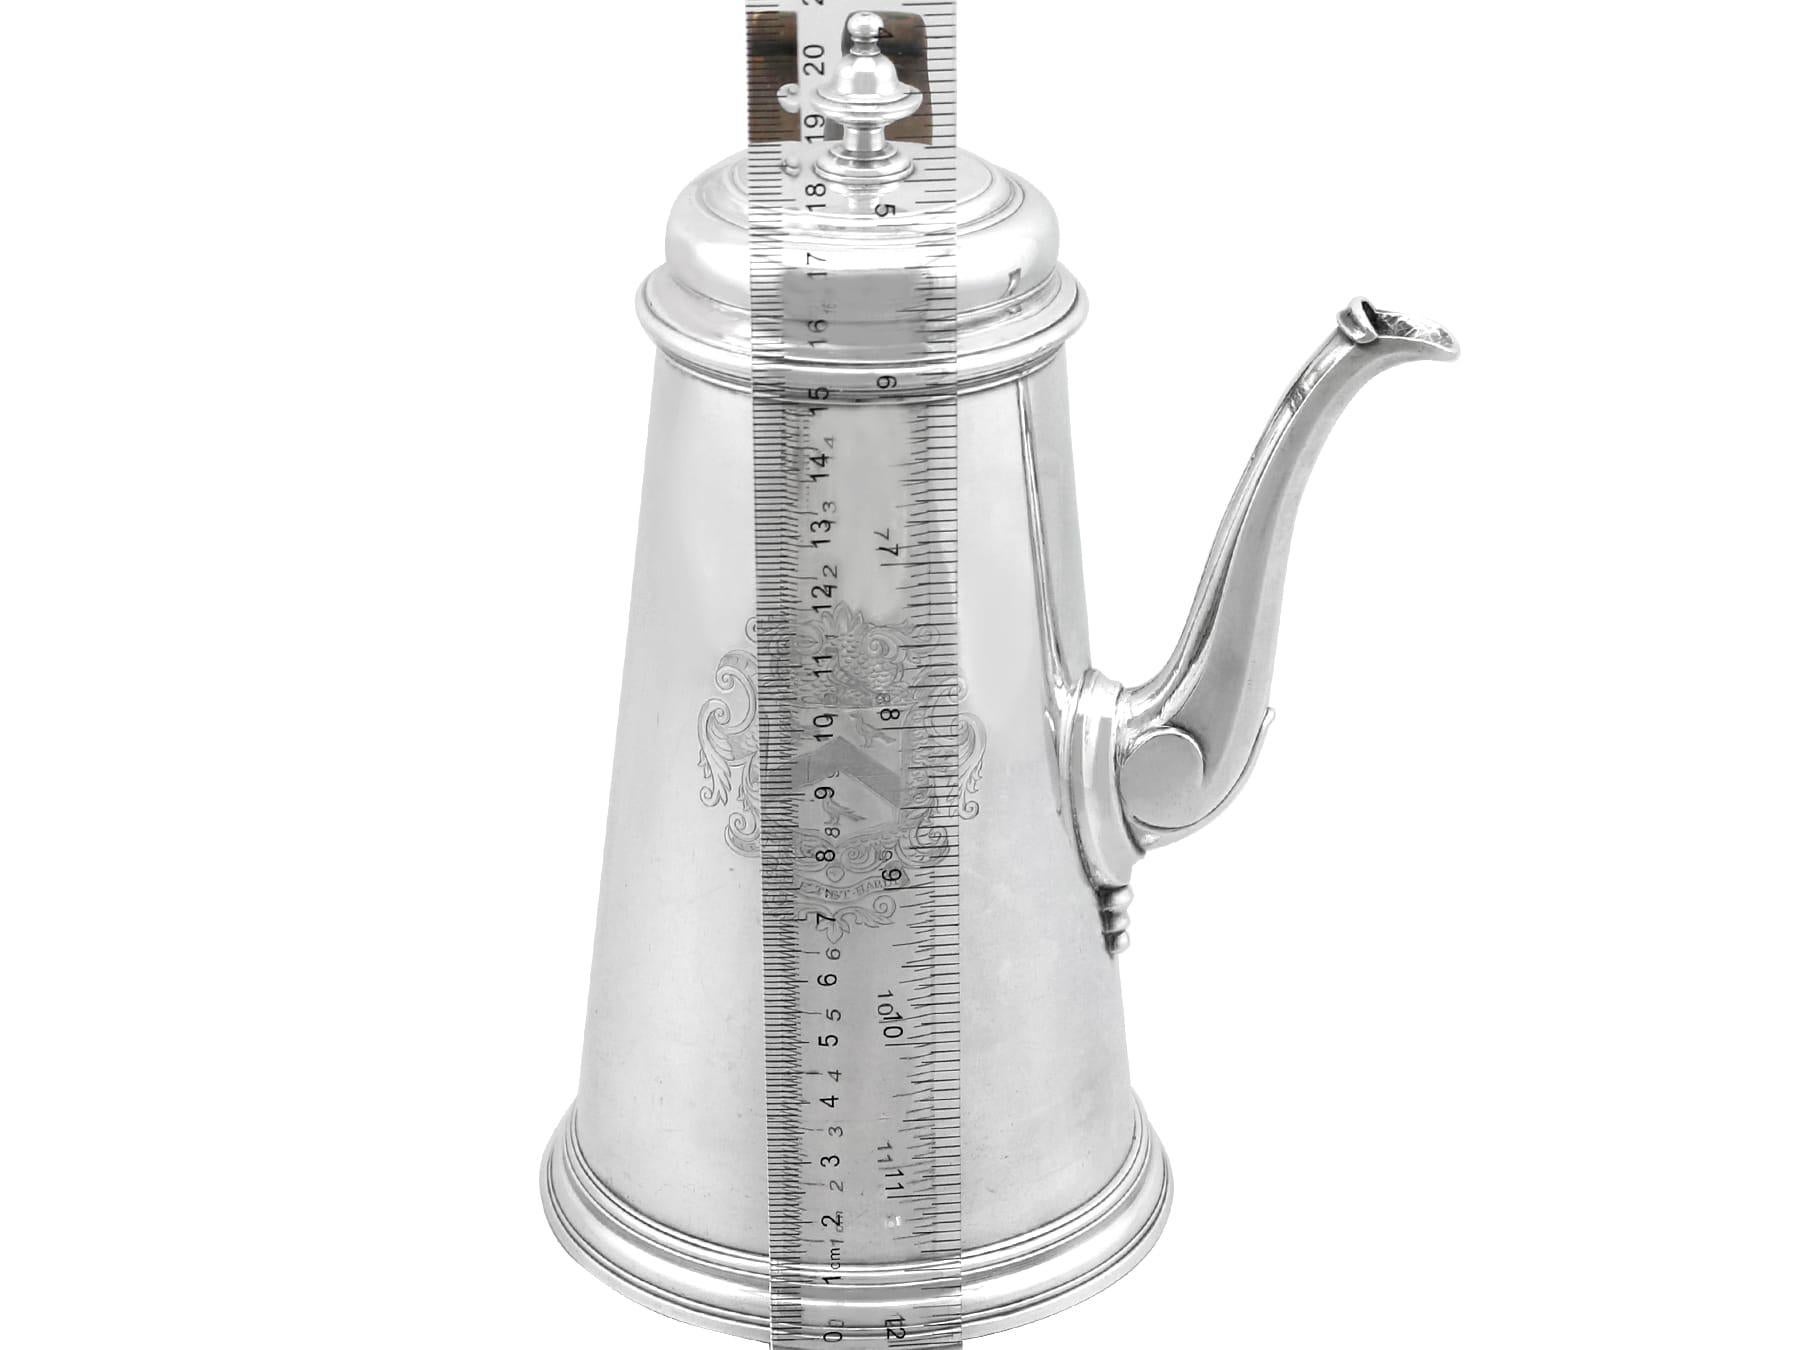 An exceptional, fine and impressive antique Georgian sterling silver side-handled chocolate pot; an addition to our continental teaware collection

This exceptional antique George II English sterling silver hot chocolate pot has a plain tapering